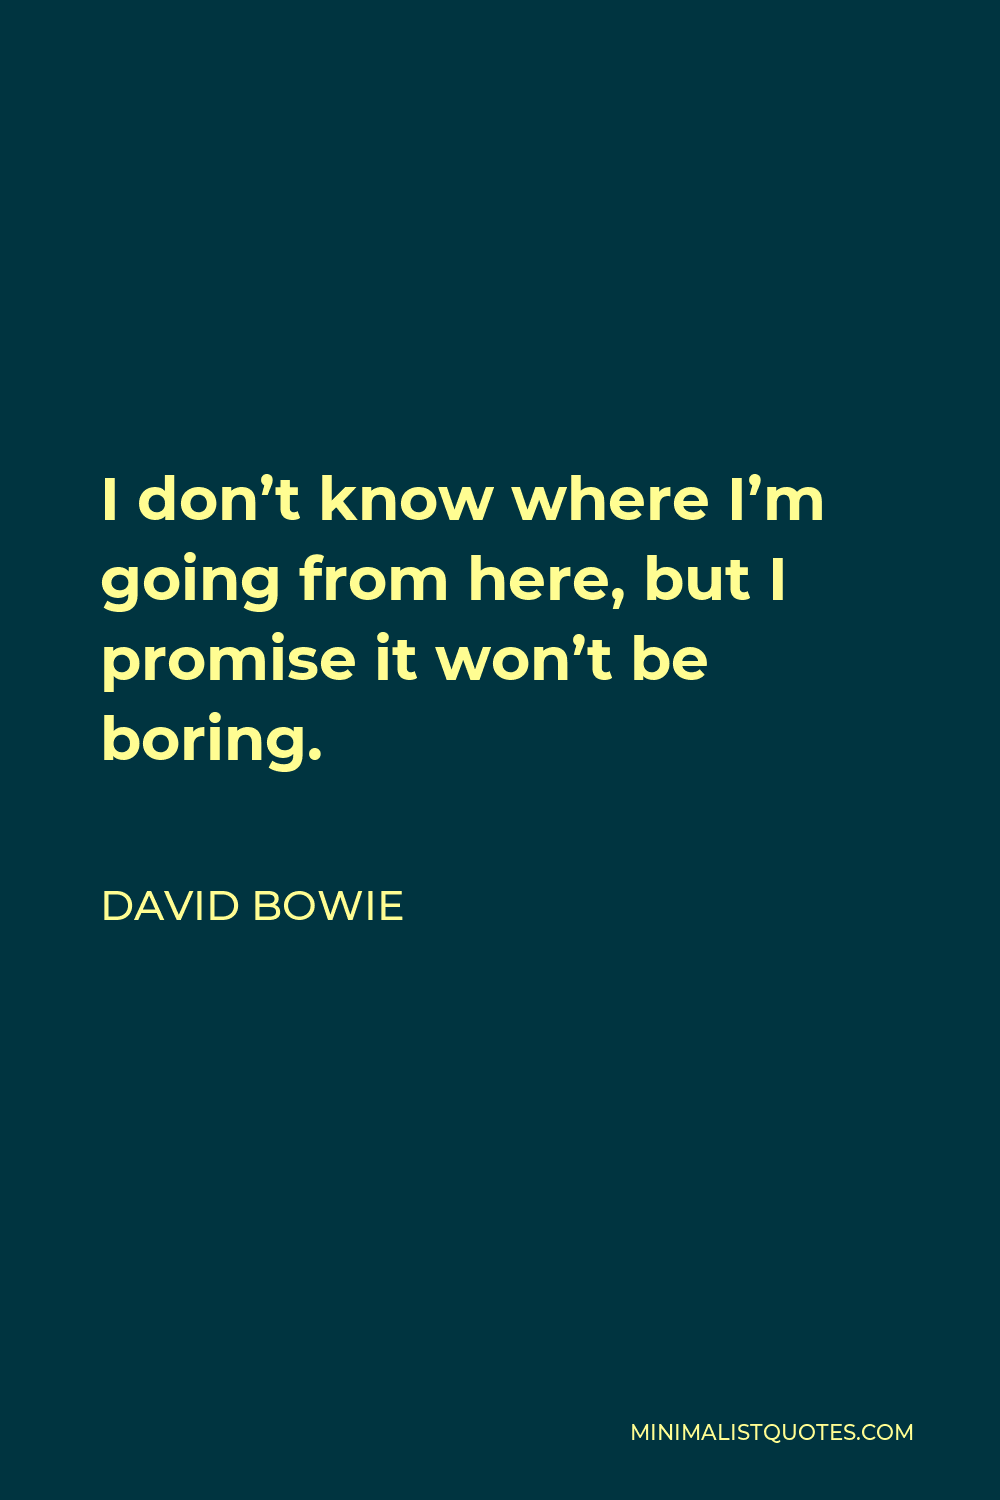 David Bowie Quote - I don’t know where I’m going from here, but I promise it won’t be boring.